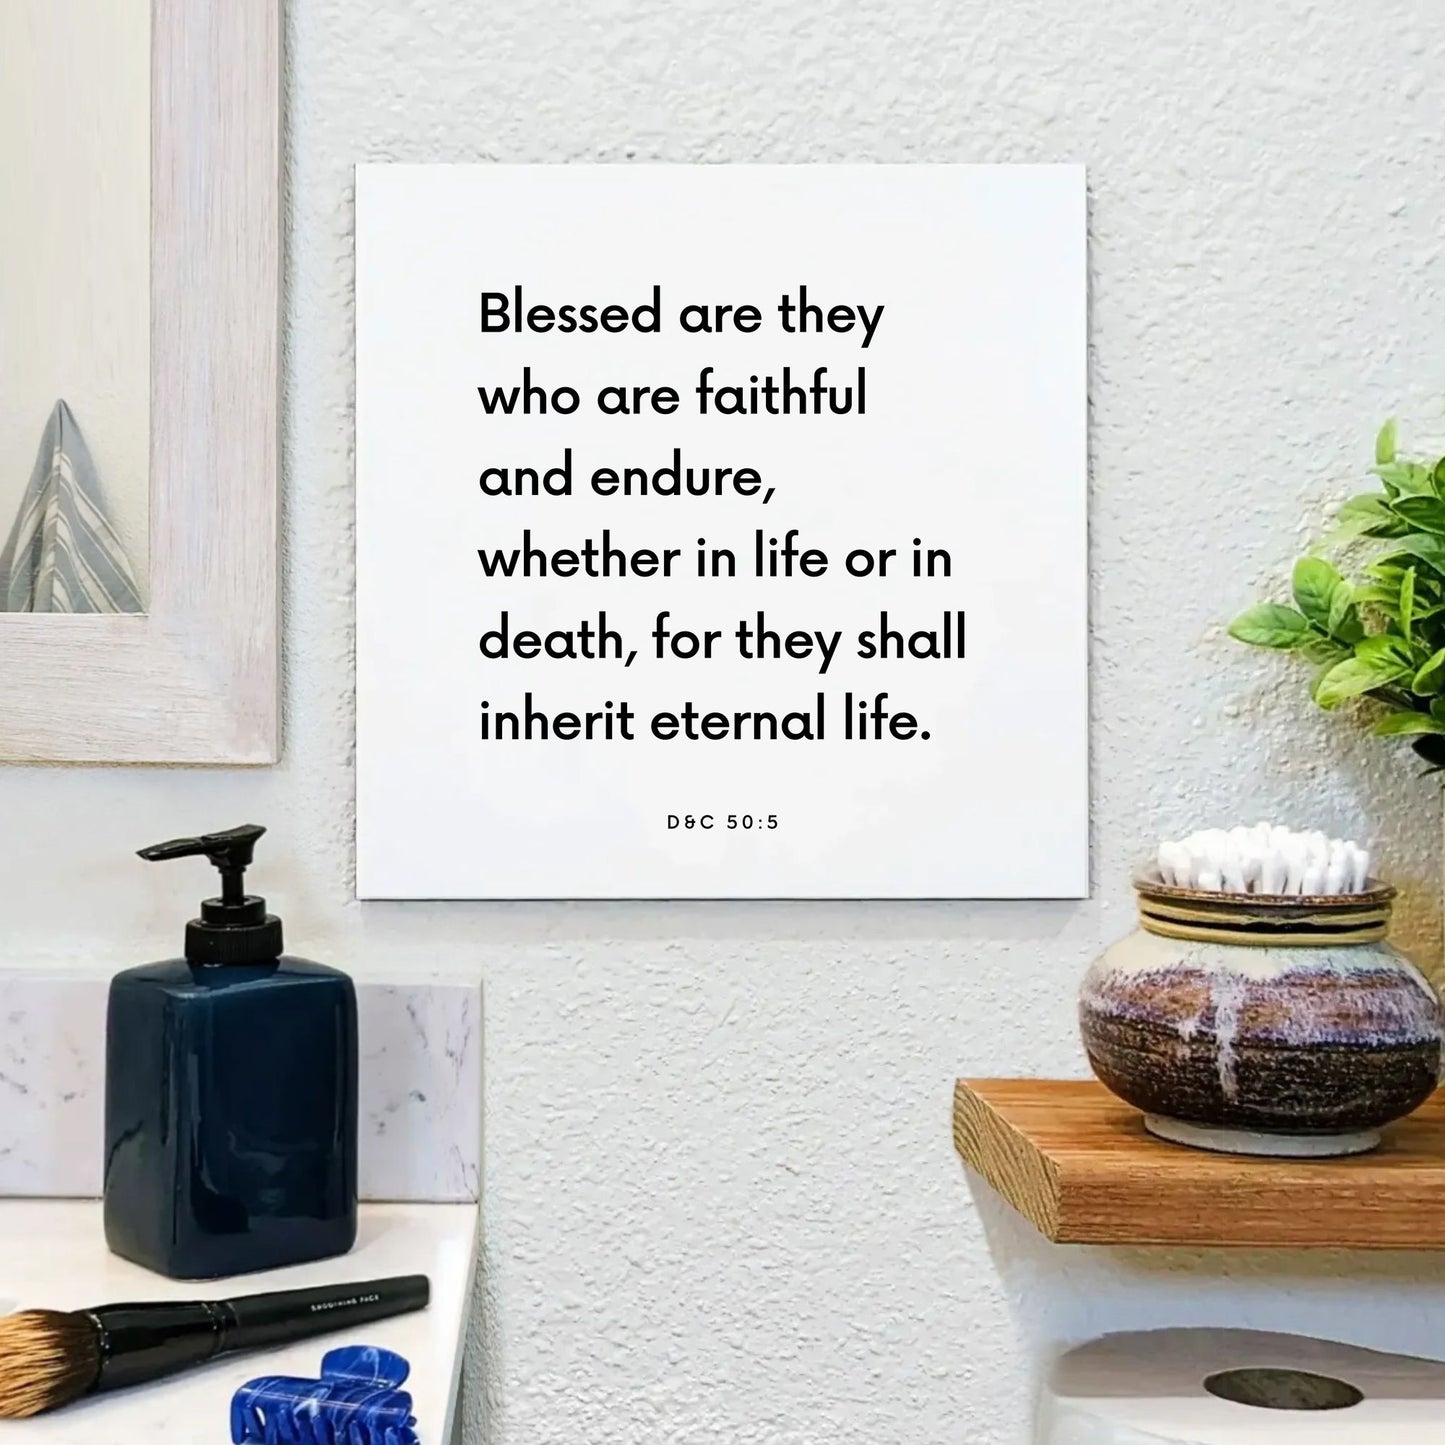 Bathroom mouting of the scripture tile for D&C 50:5 - "Blessed are they who are faithful and endure"